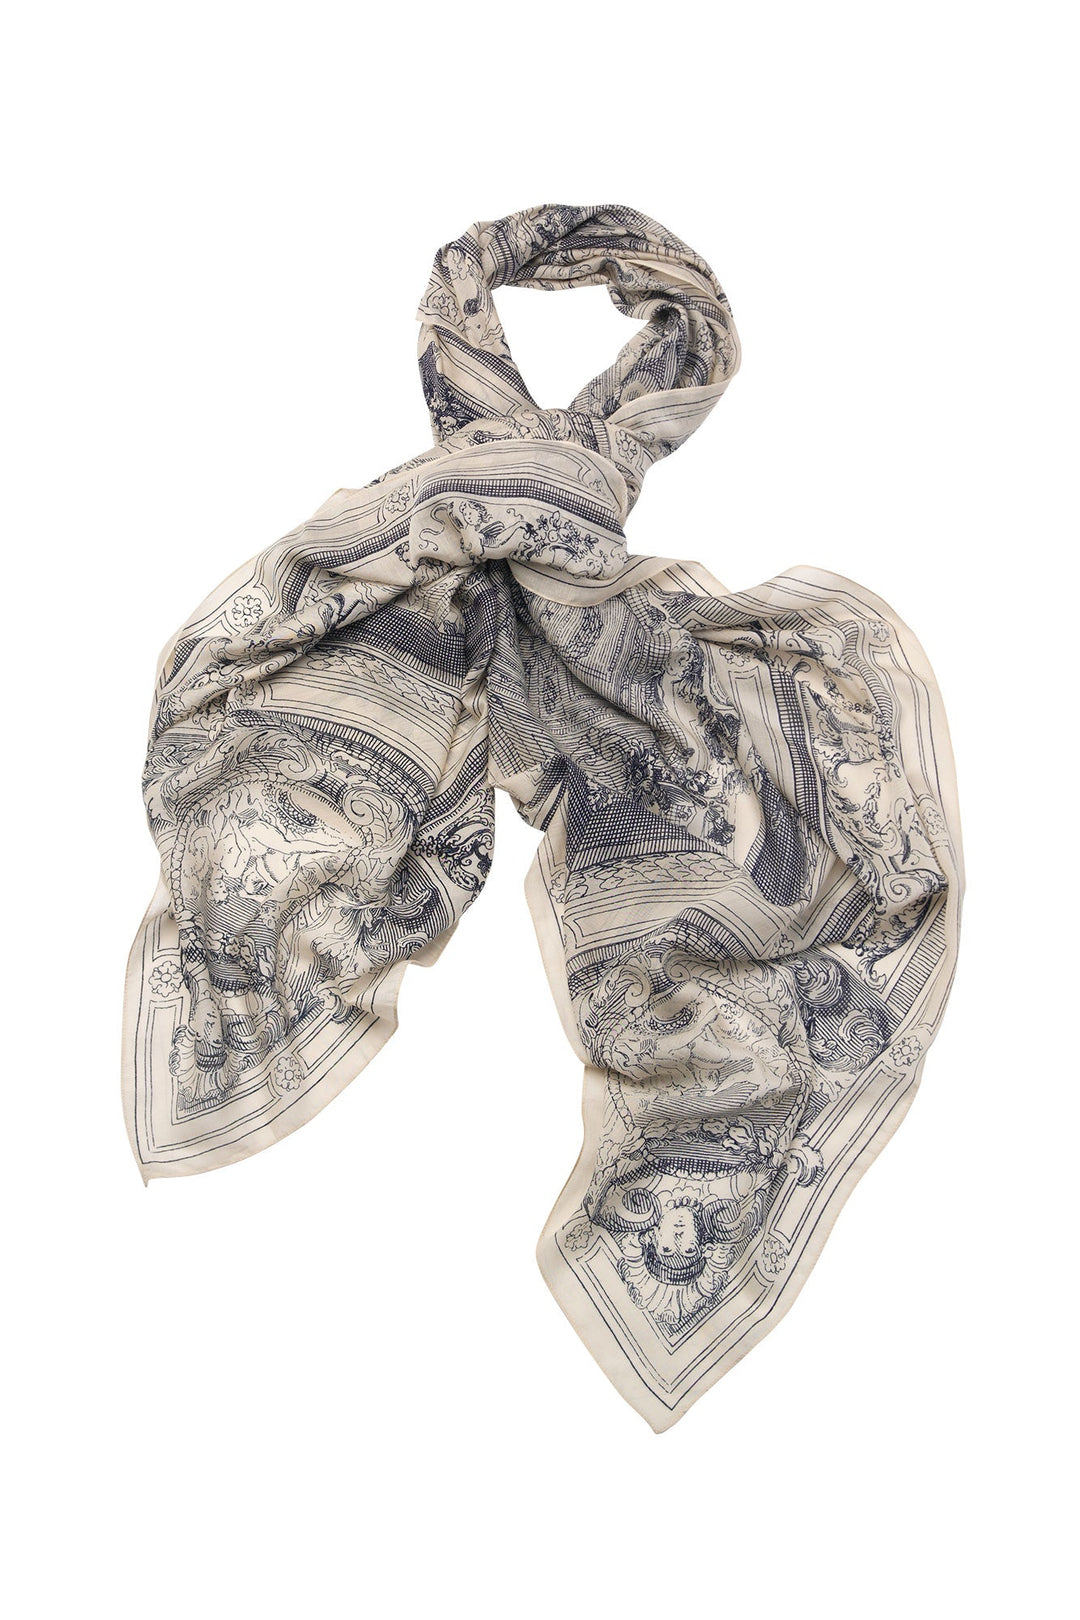 Women's accessories, large scarf in cherub print by One Hundred Stars